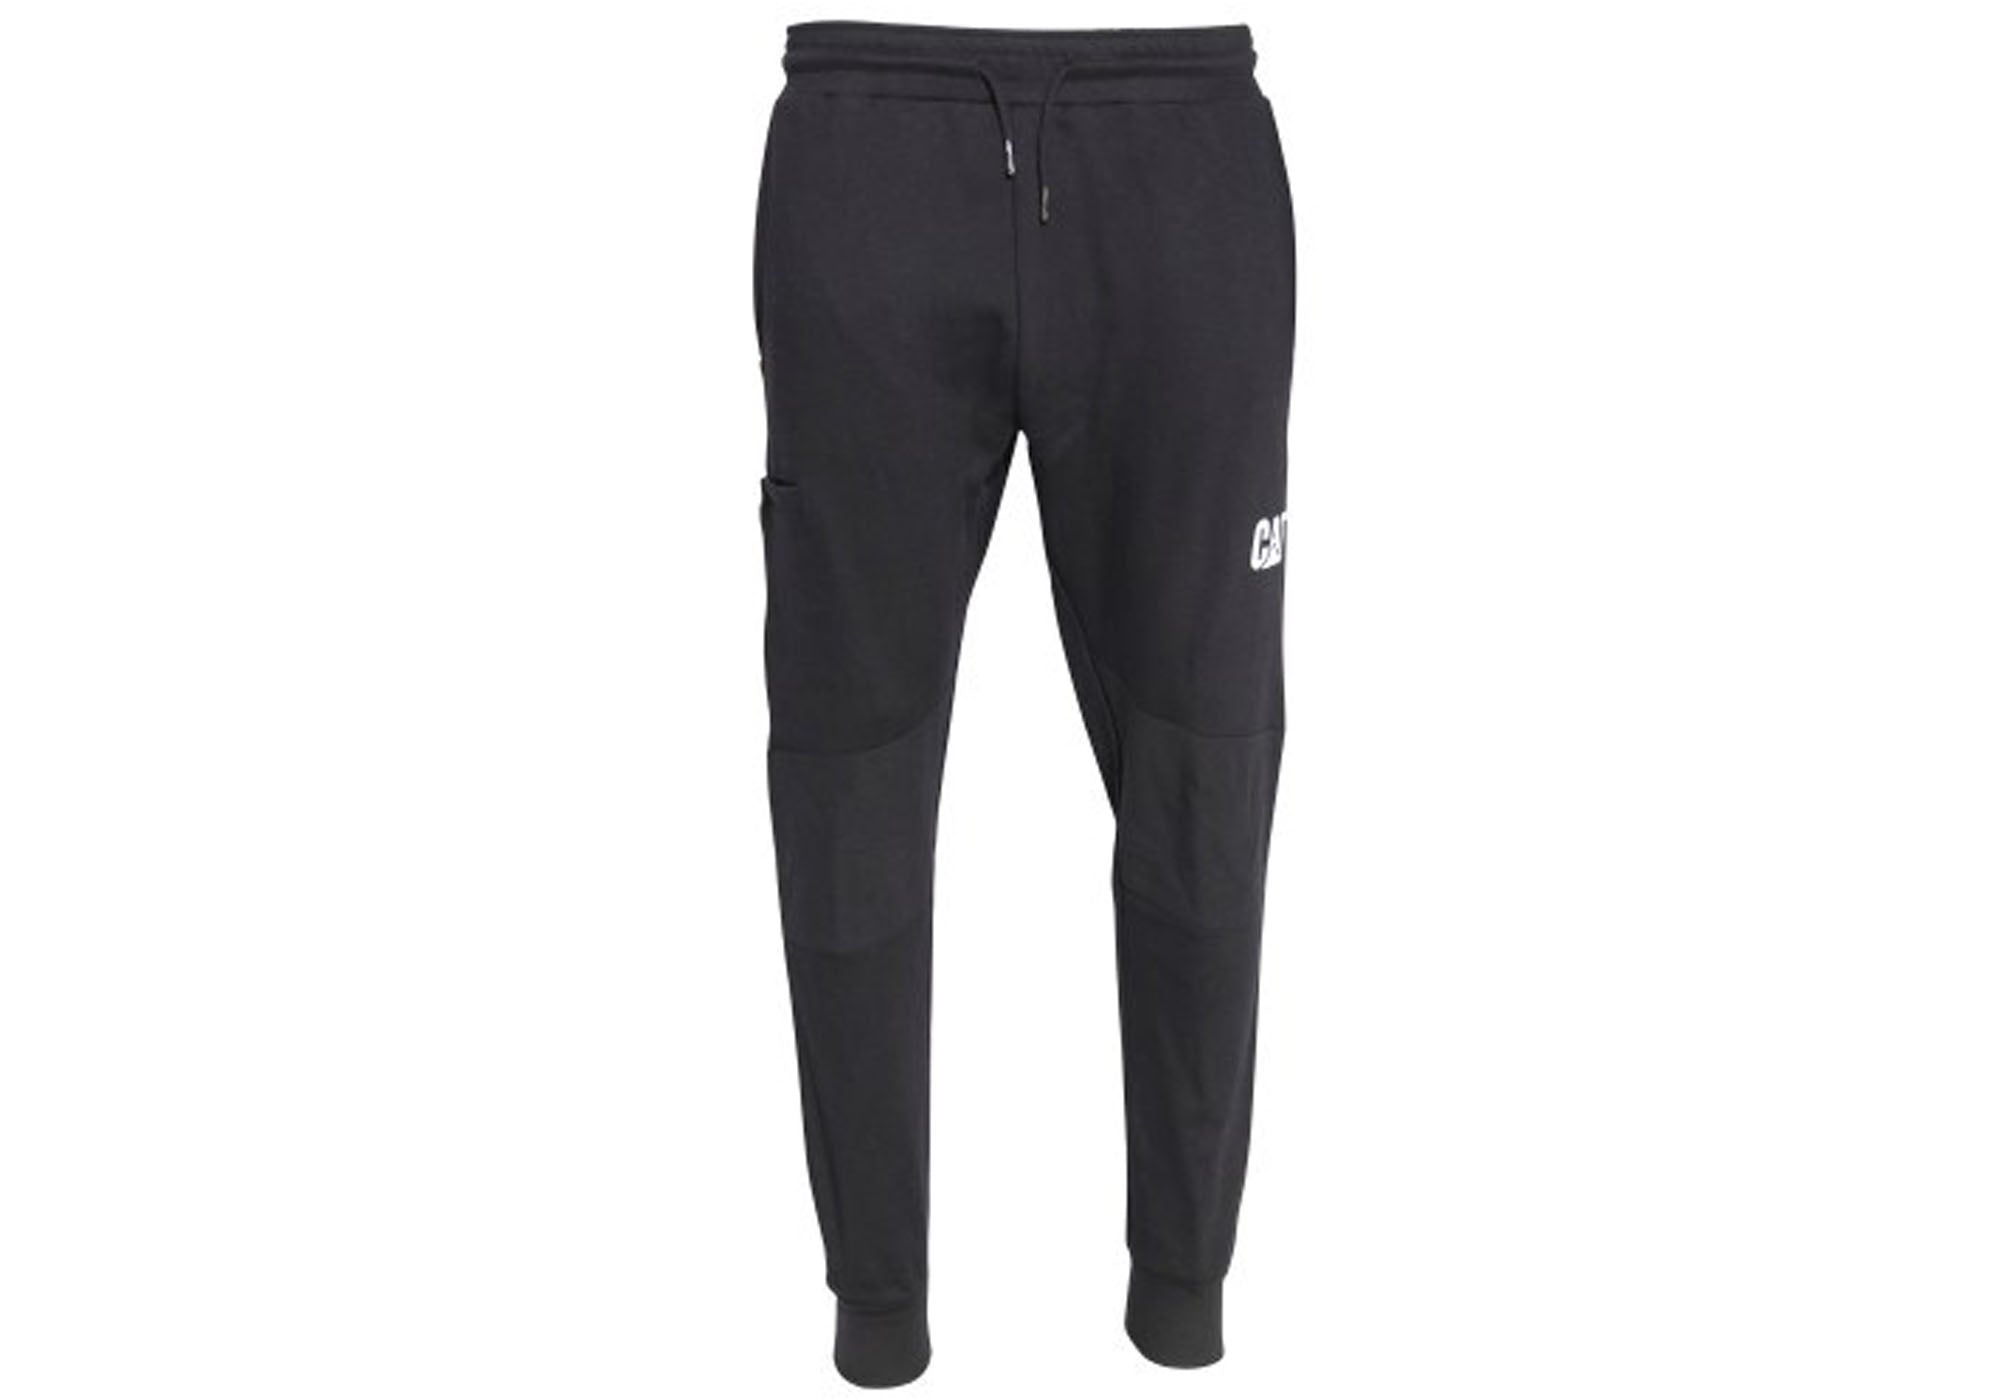 Caterpillar Mens Comfortable Durable Track Pants | Brand House Direct